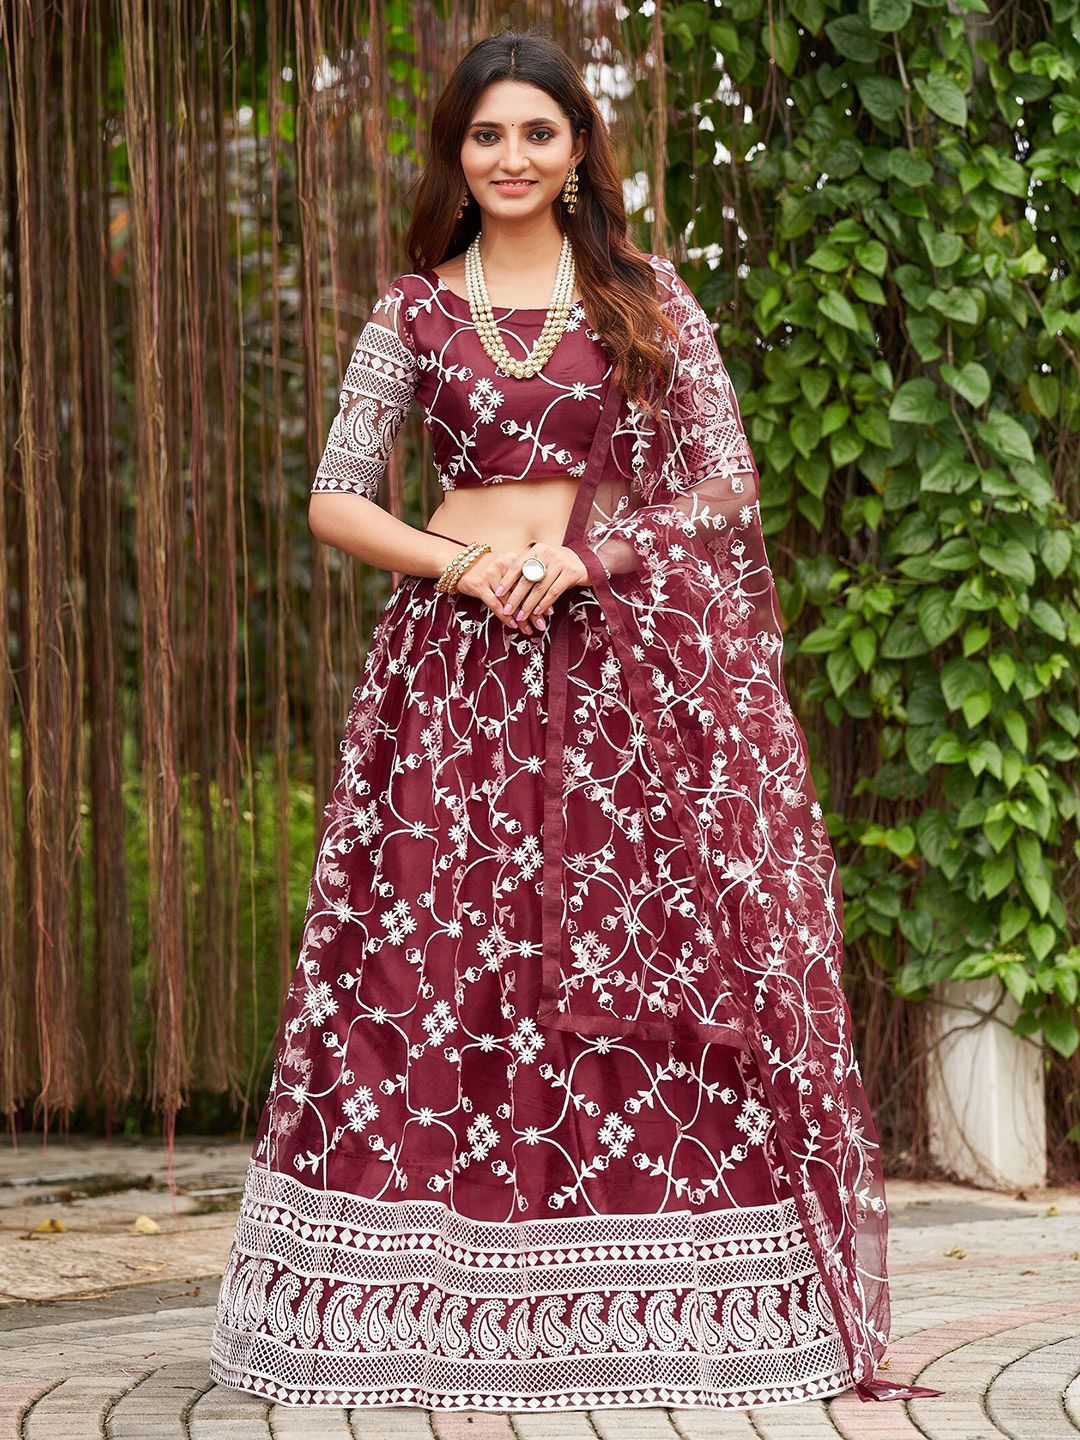 KALINI Embroidered Thread Work Semi-Stitched Lehenga & Unstitched Blouse With Dupatta Price in India